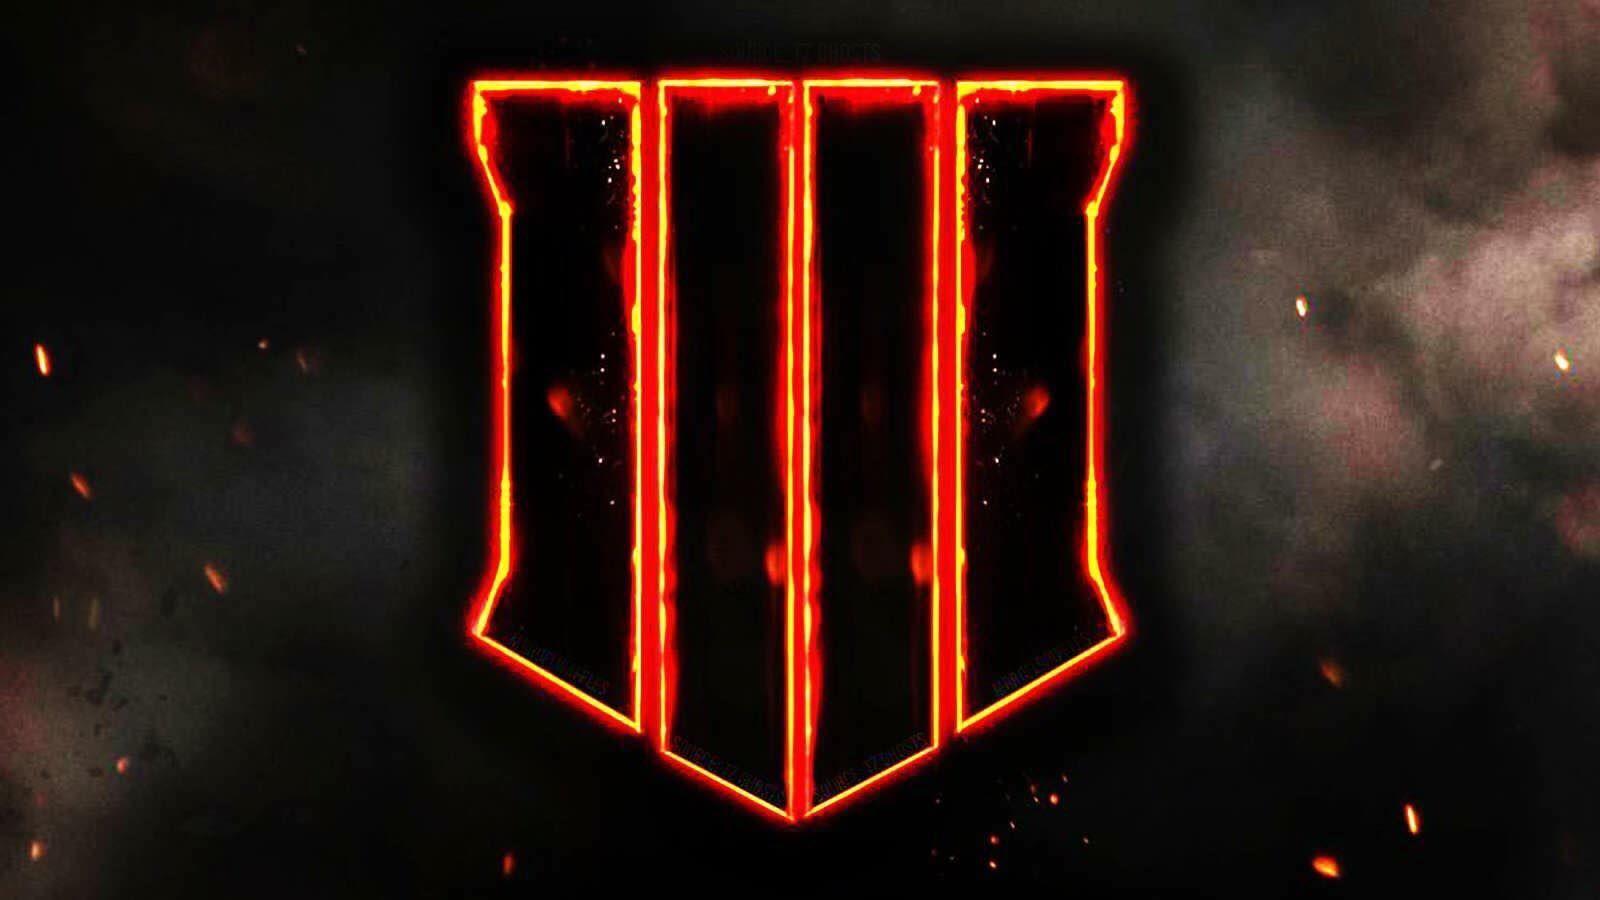 Official Bo4 Logo - The BO4 logo | Gaming | Pinterest | Black ops, Black ops 4 and Call ...